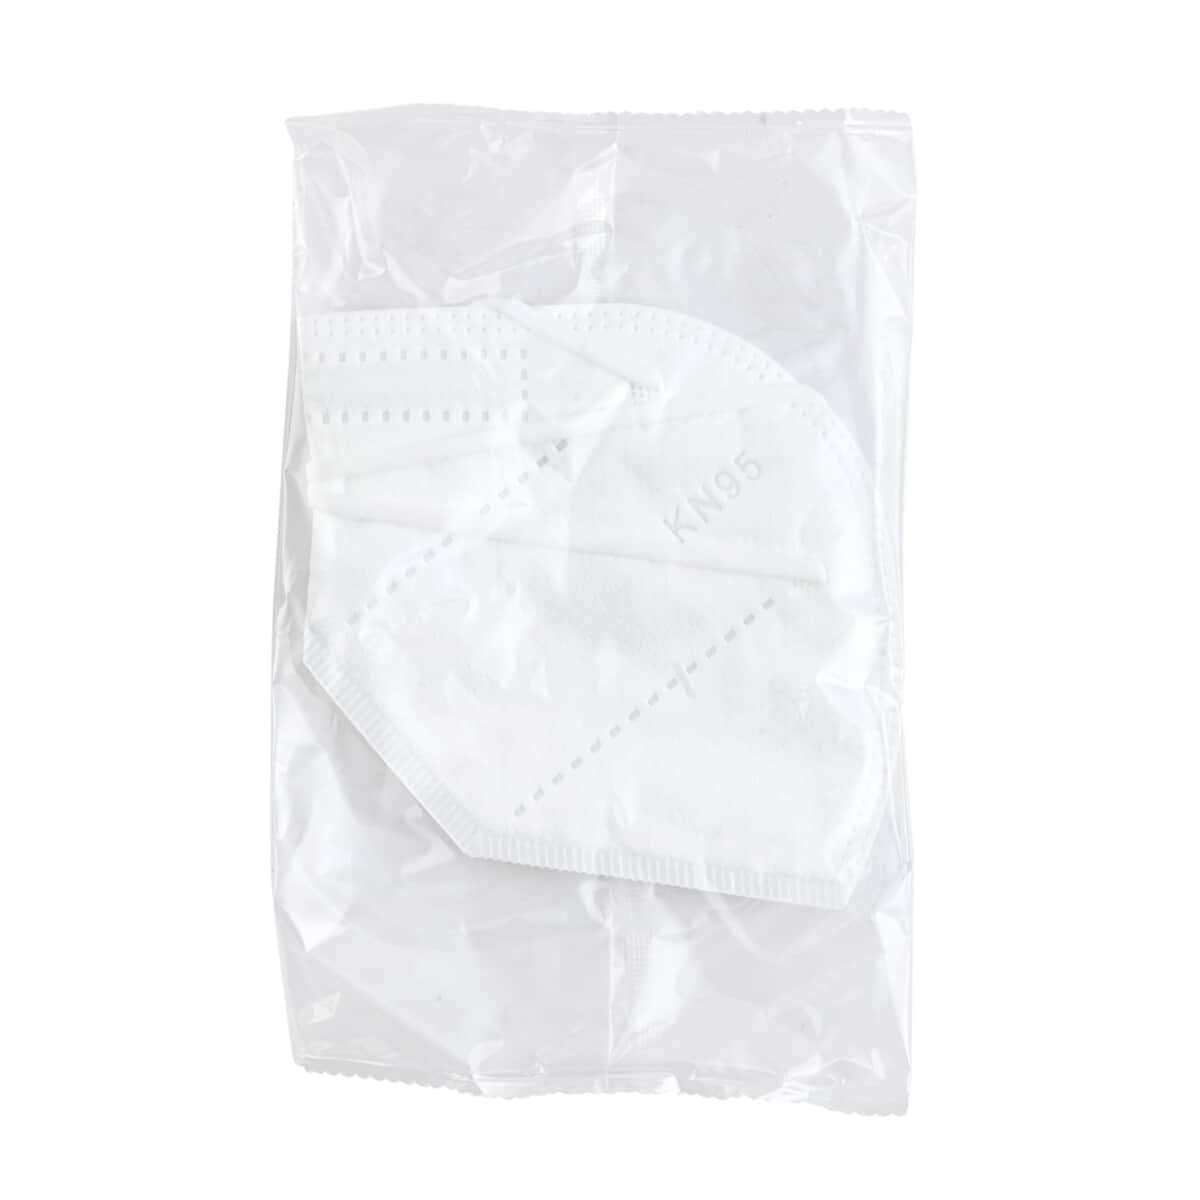 Set of 50 KN95 Disposable Protection Masks 5 Layer (Non Returnable) image number 4